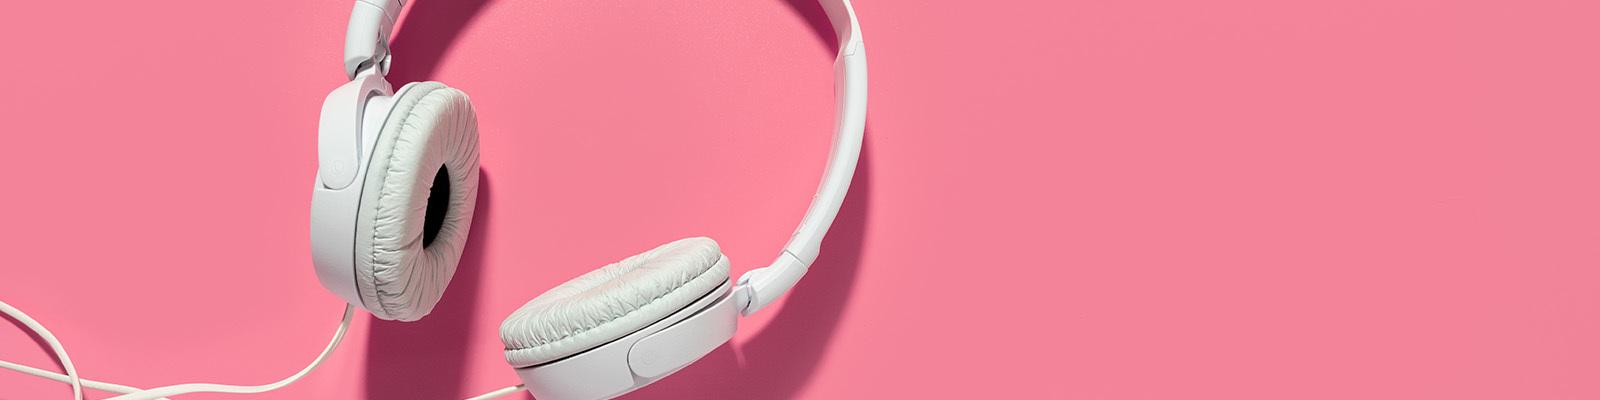 Large white headphones with cord lay on a bright pink background.